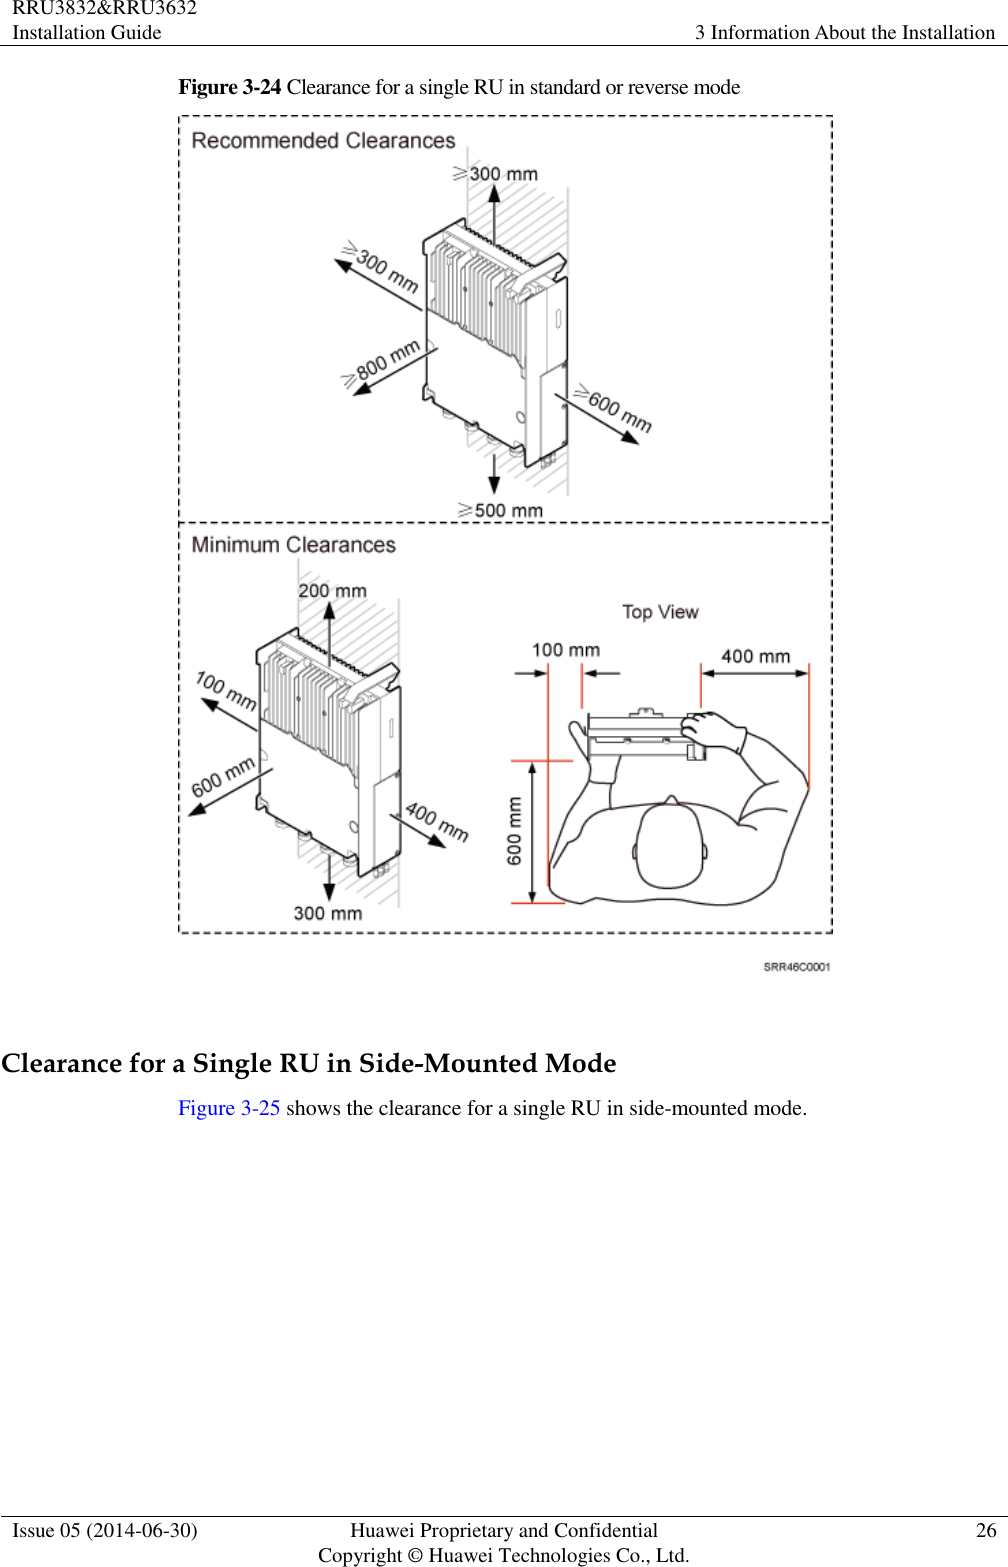 RRU3832&amp;RRU3632 Installation Guide 3 Information About the Installation  Issue 05 (2014-06-30) Huawei Proprietary and Confidential                                     Copyright © Huawei Technologies Co., Ltd. 26  Figure 3-24 Clearance for a single RU in standard or reverse mode   Clearance for a Single RU in Side-Mounted Mode Figure 3-25 shows the clearance for a single RU in side-mounted mode. 